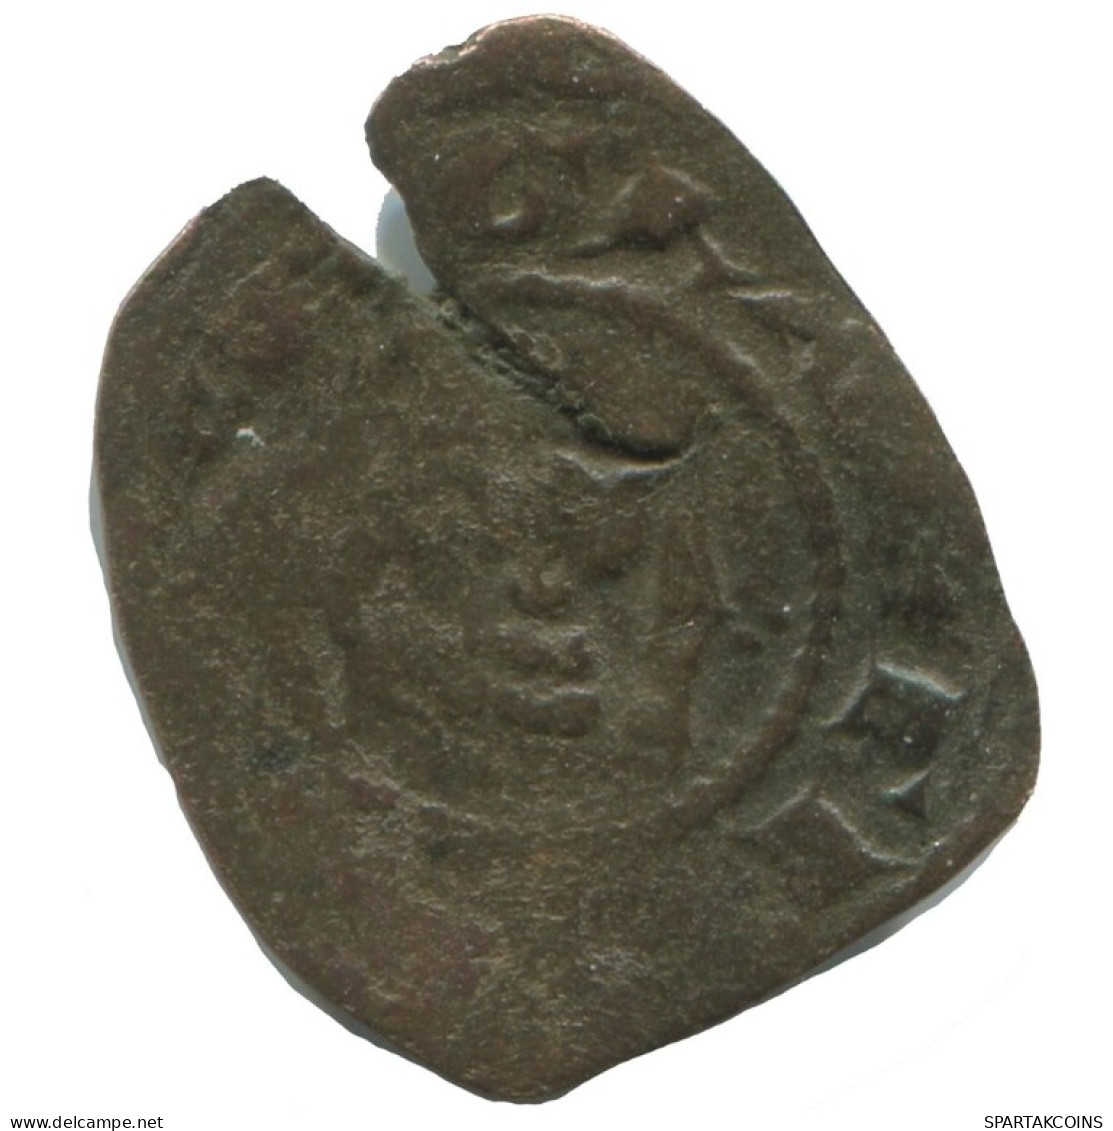 CRUSADER CROSS Authentic Original MEDIEVAL EUROPEAN Coin 1.8g/16mm #AC265.8.D.A - Other - Europe